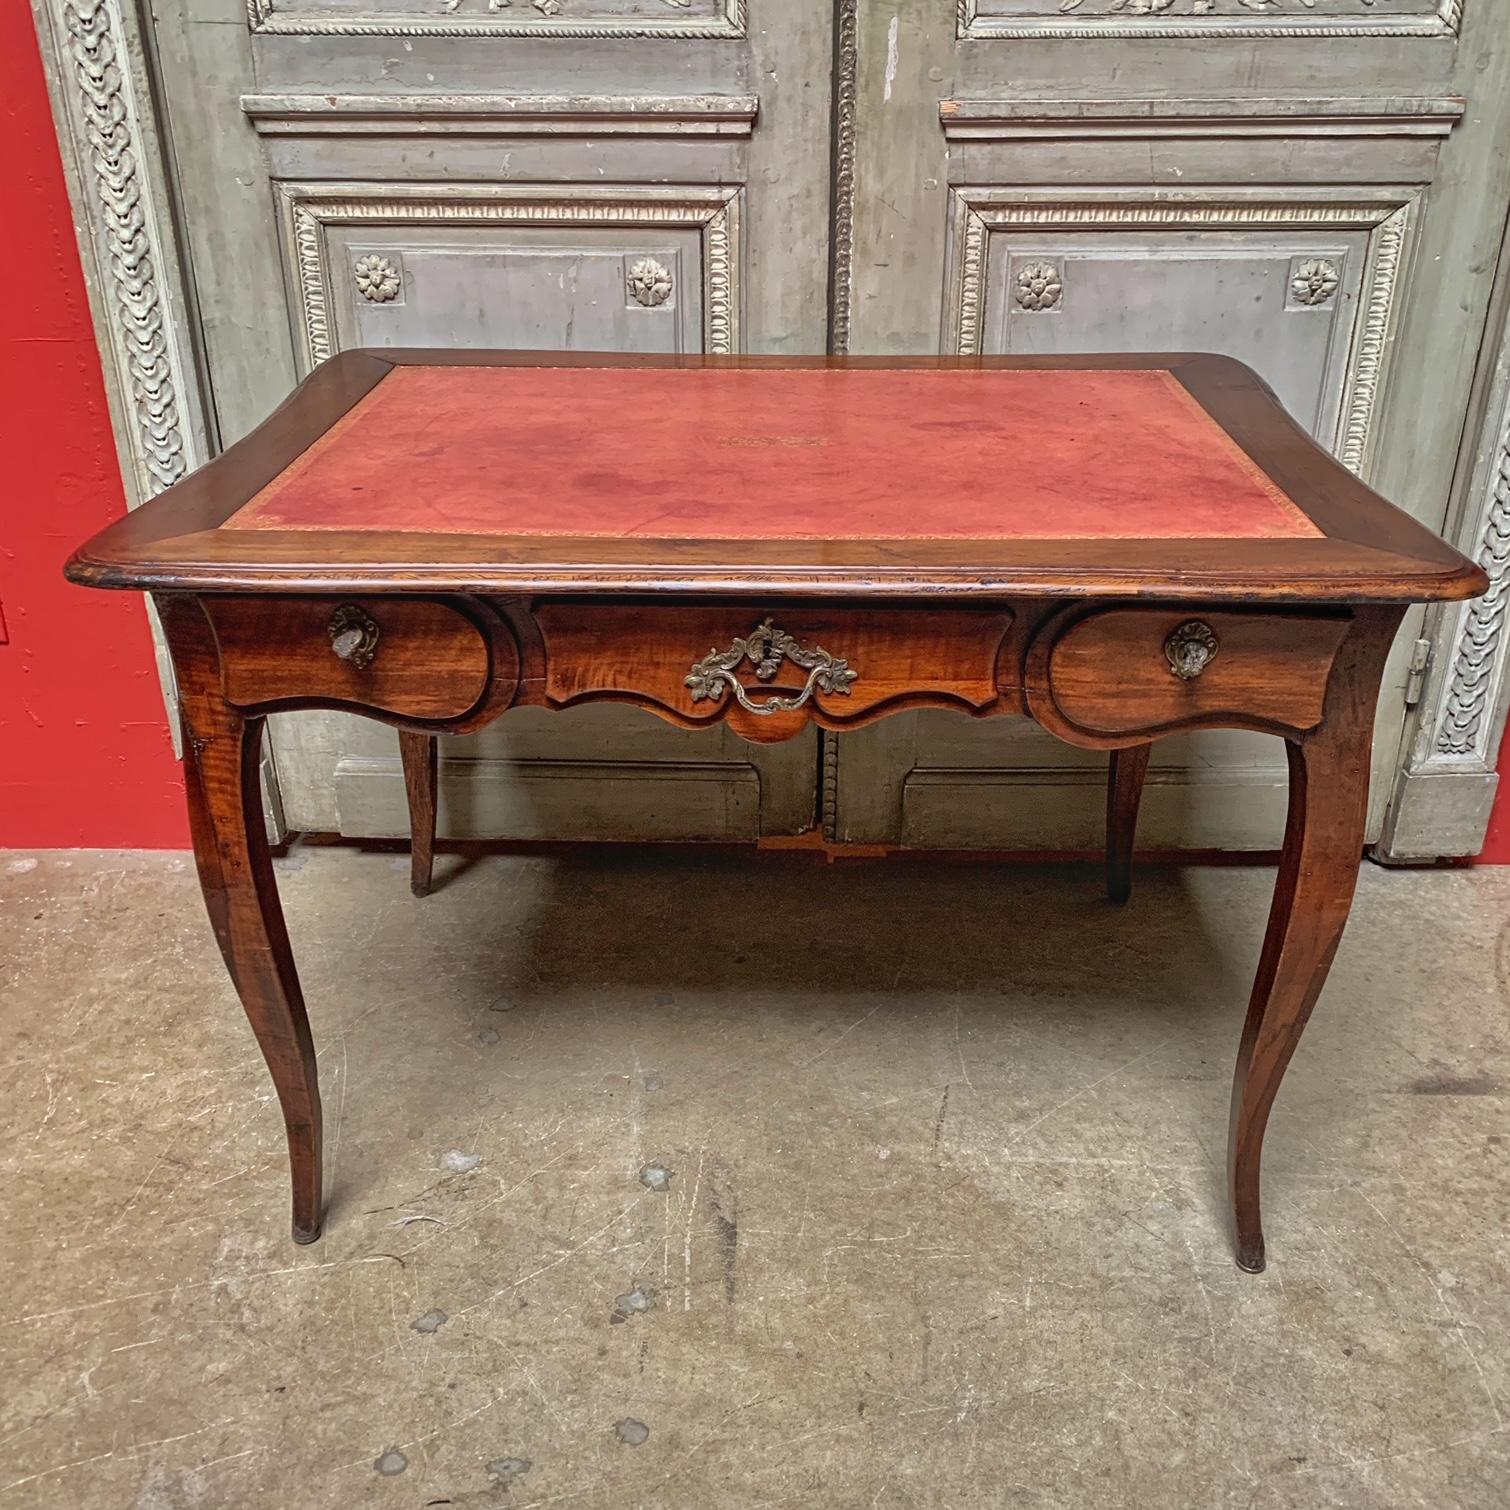 A Louis XV style French writing table in walnut with bronze hardware and an antique red leather tooled top.
This beautiful table is probably from the Lyon region of France and is from the 19th century. It would be a great side table as well as a